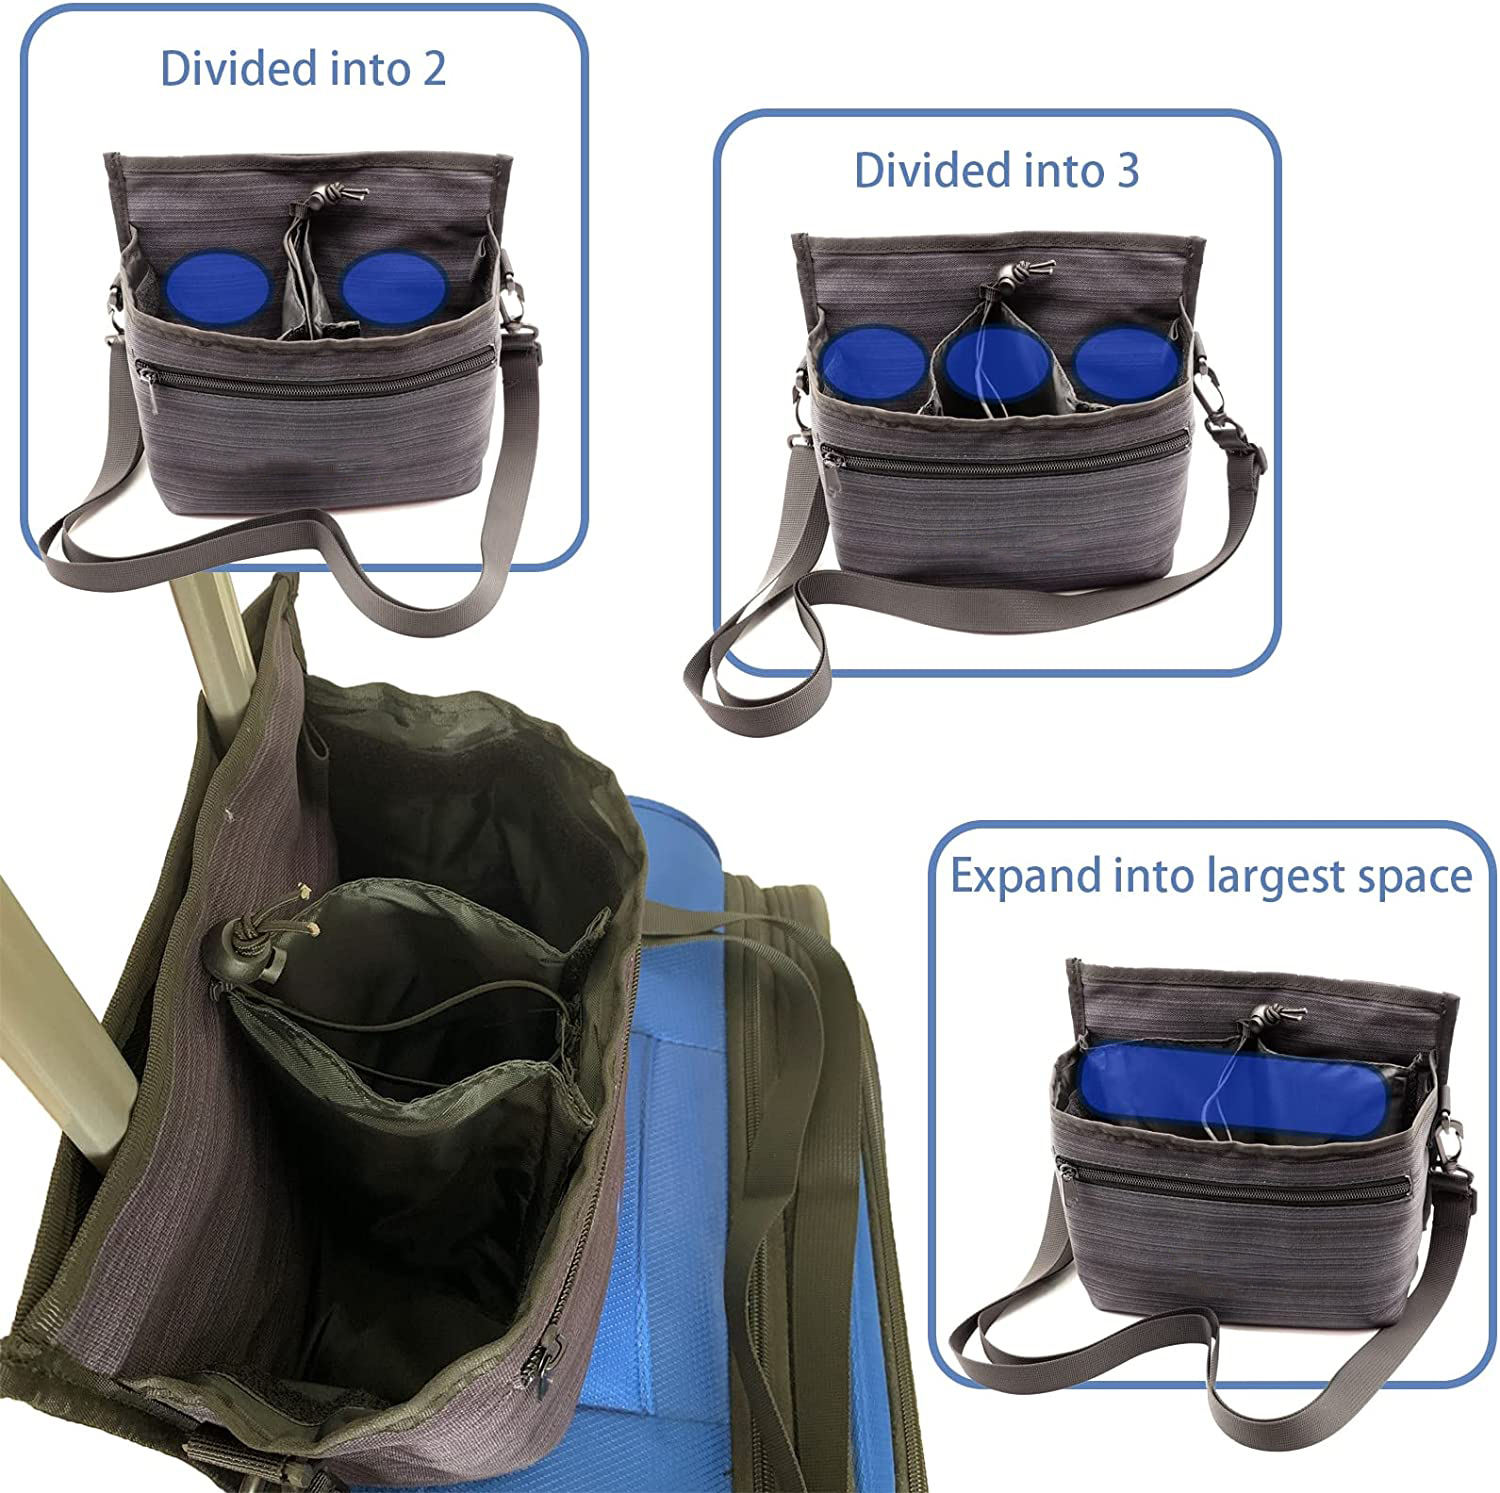 New Thermal Luggage Travel Cup Holder Bag With Shoulder Strap Insulated Travel Drink Caddy Free Your Hand Oem Acceptable